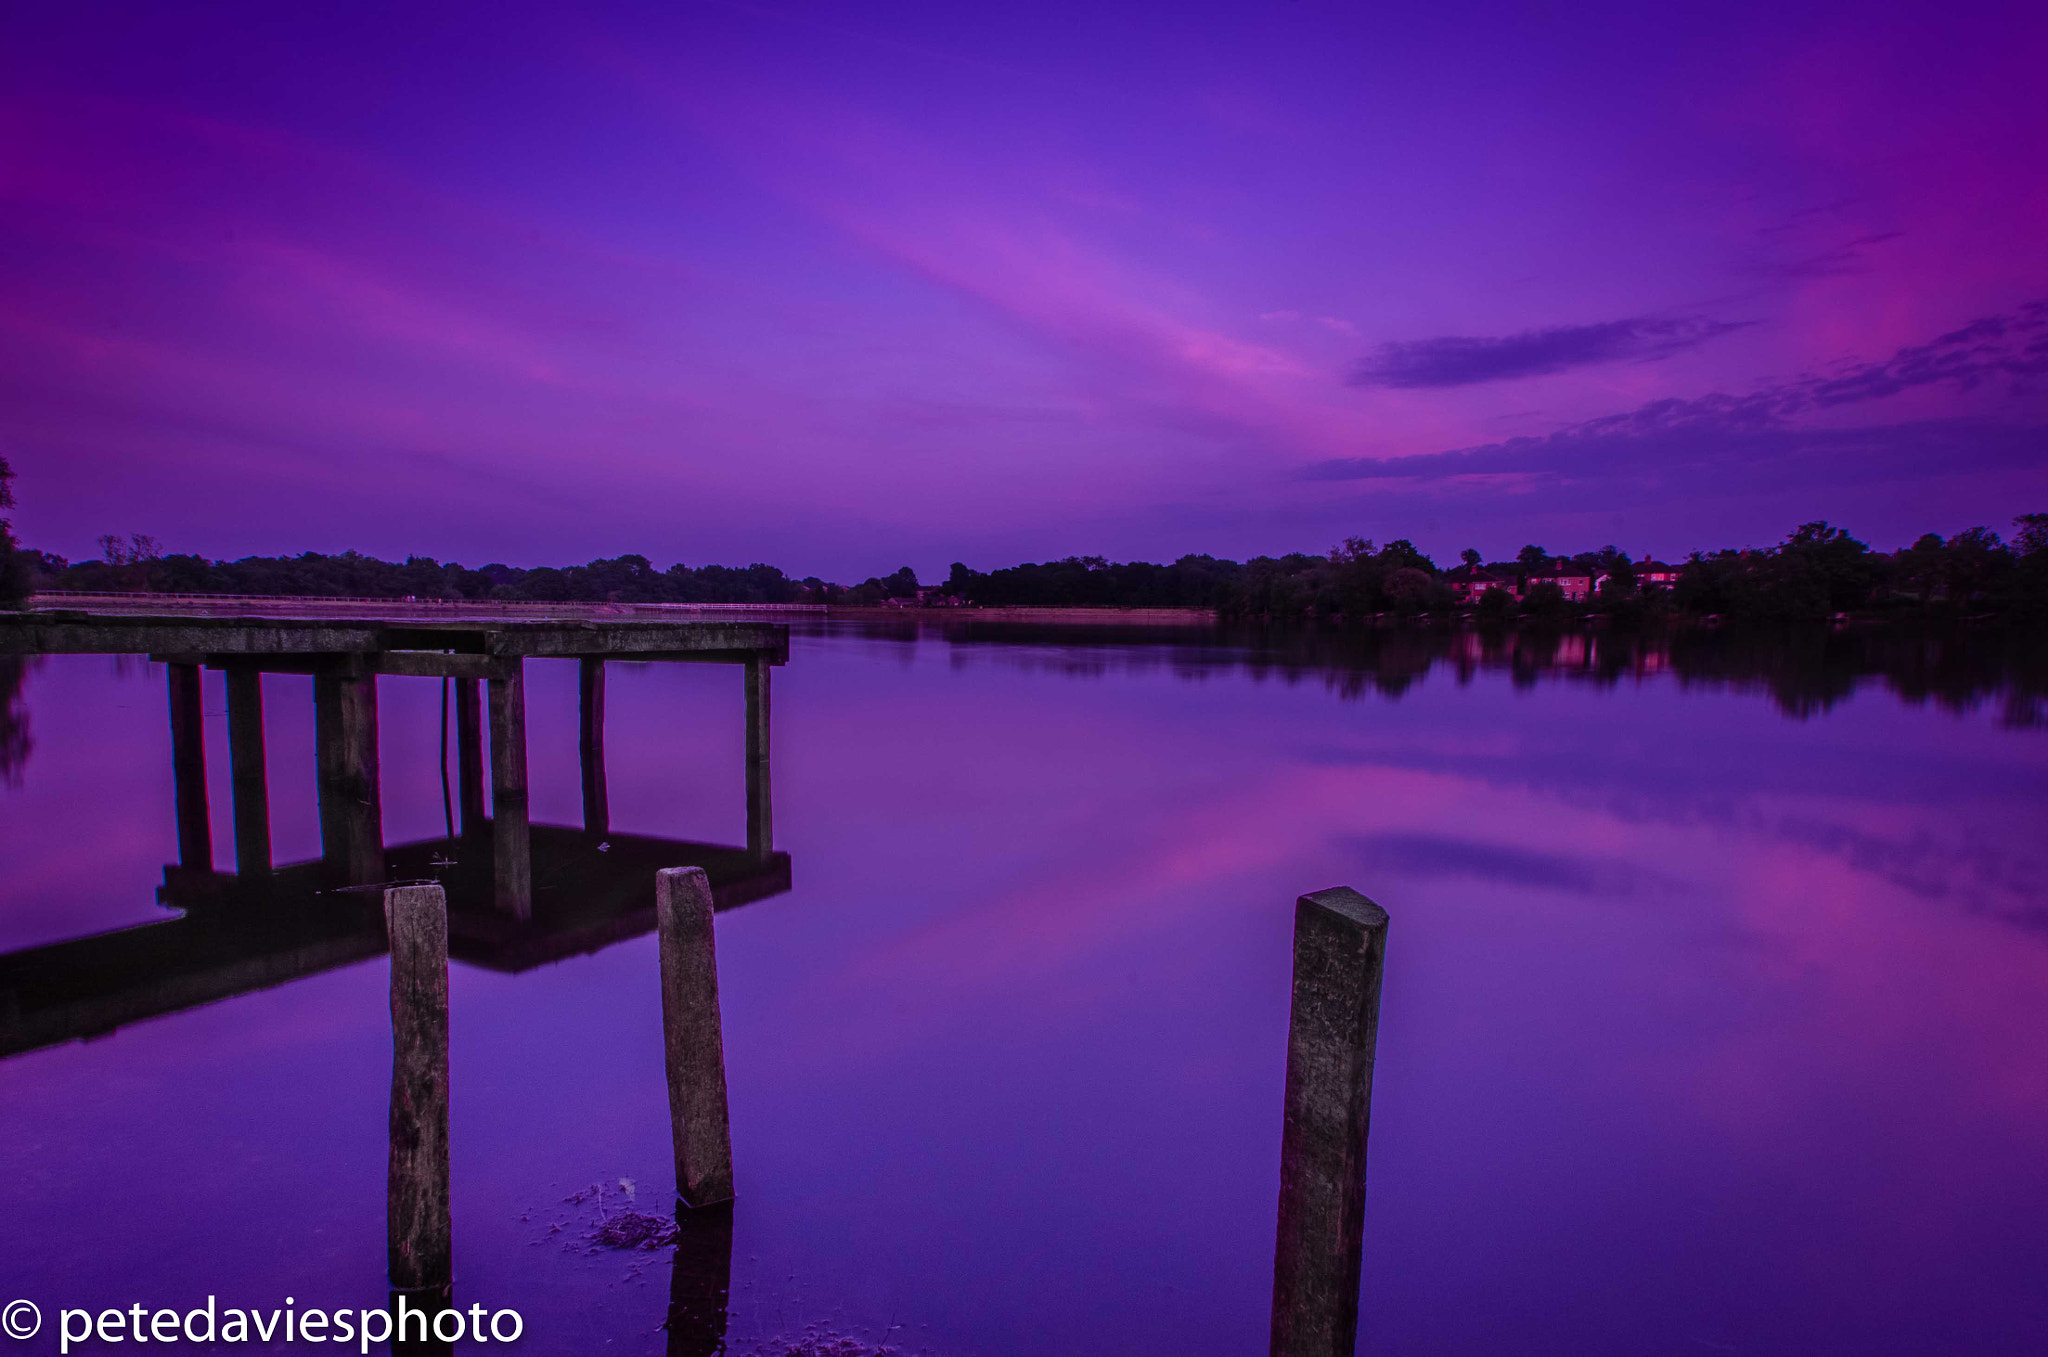 Pentax K-5 + Tamron SP AF 10-24mm F3.5-4.5 Di II LD Aspherical (IF) sample photo. Blue hour at earlswood lakes photography